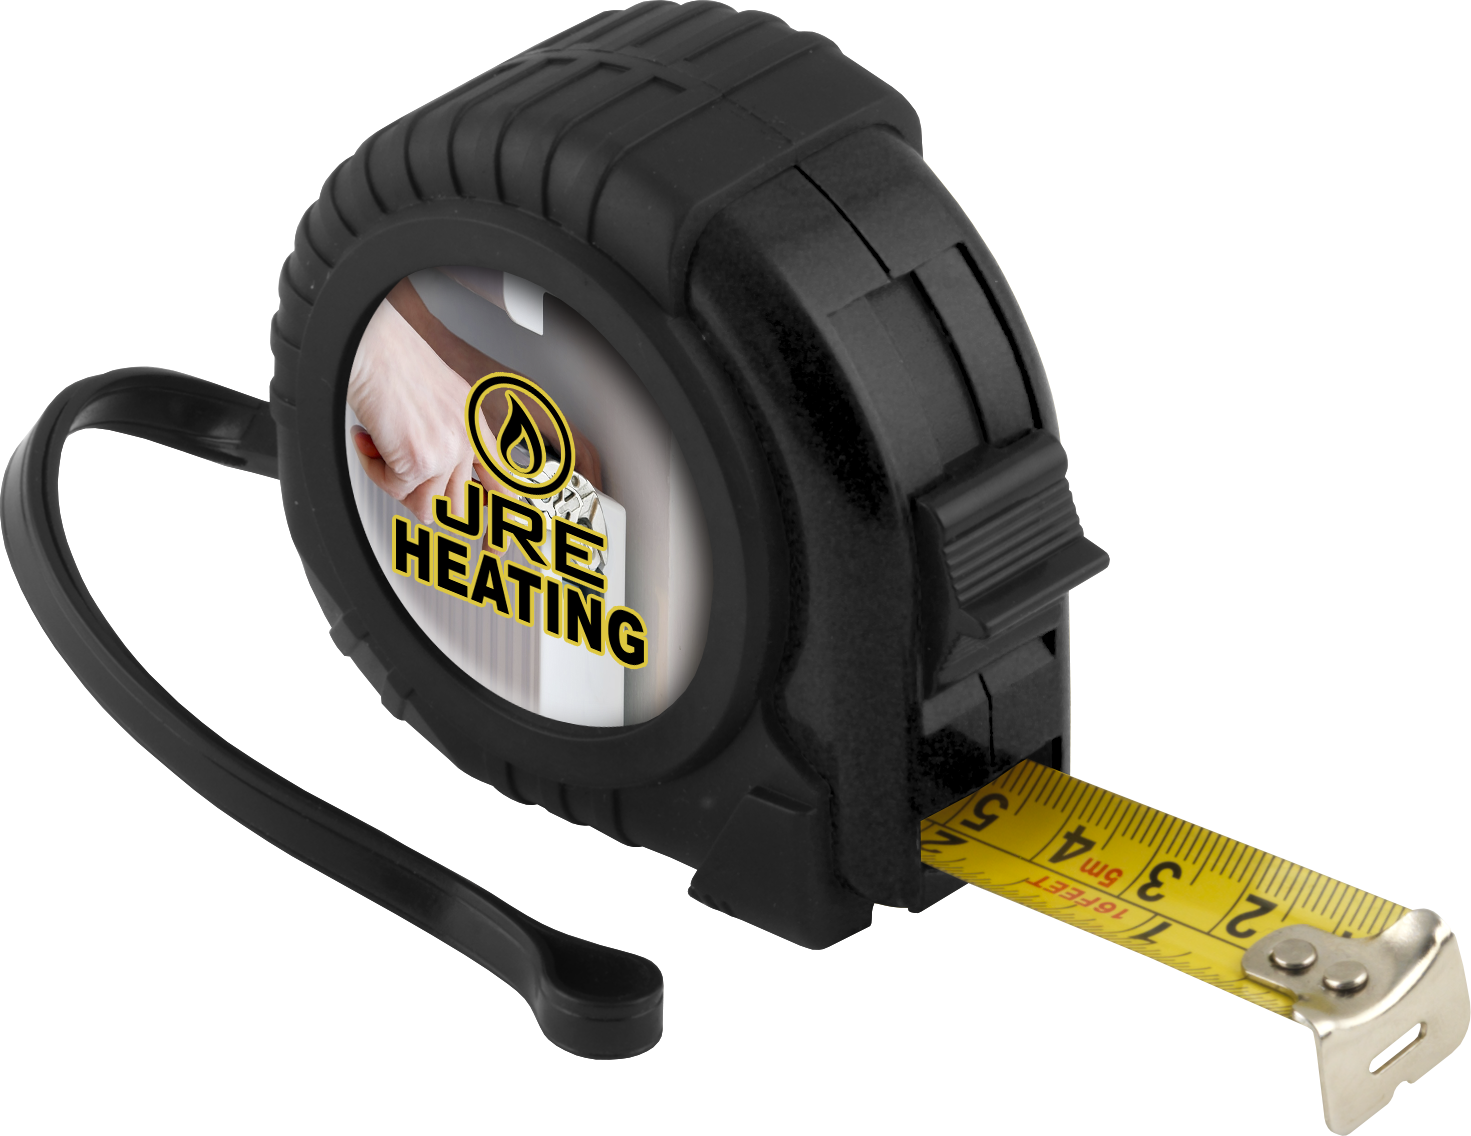 Ronin Tape Measure 5 Metre Snap Products